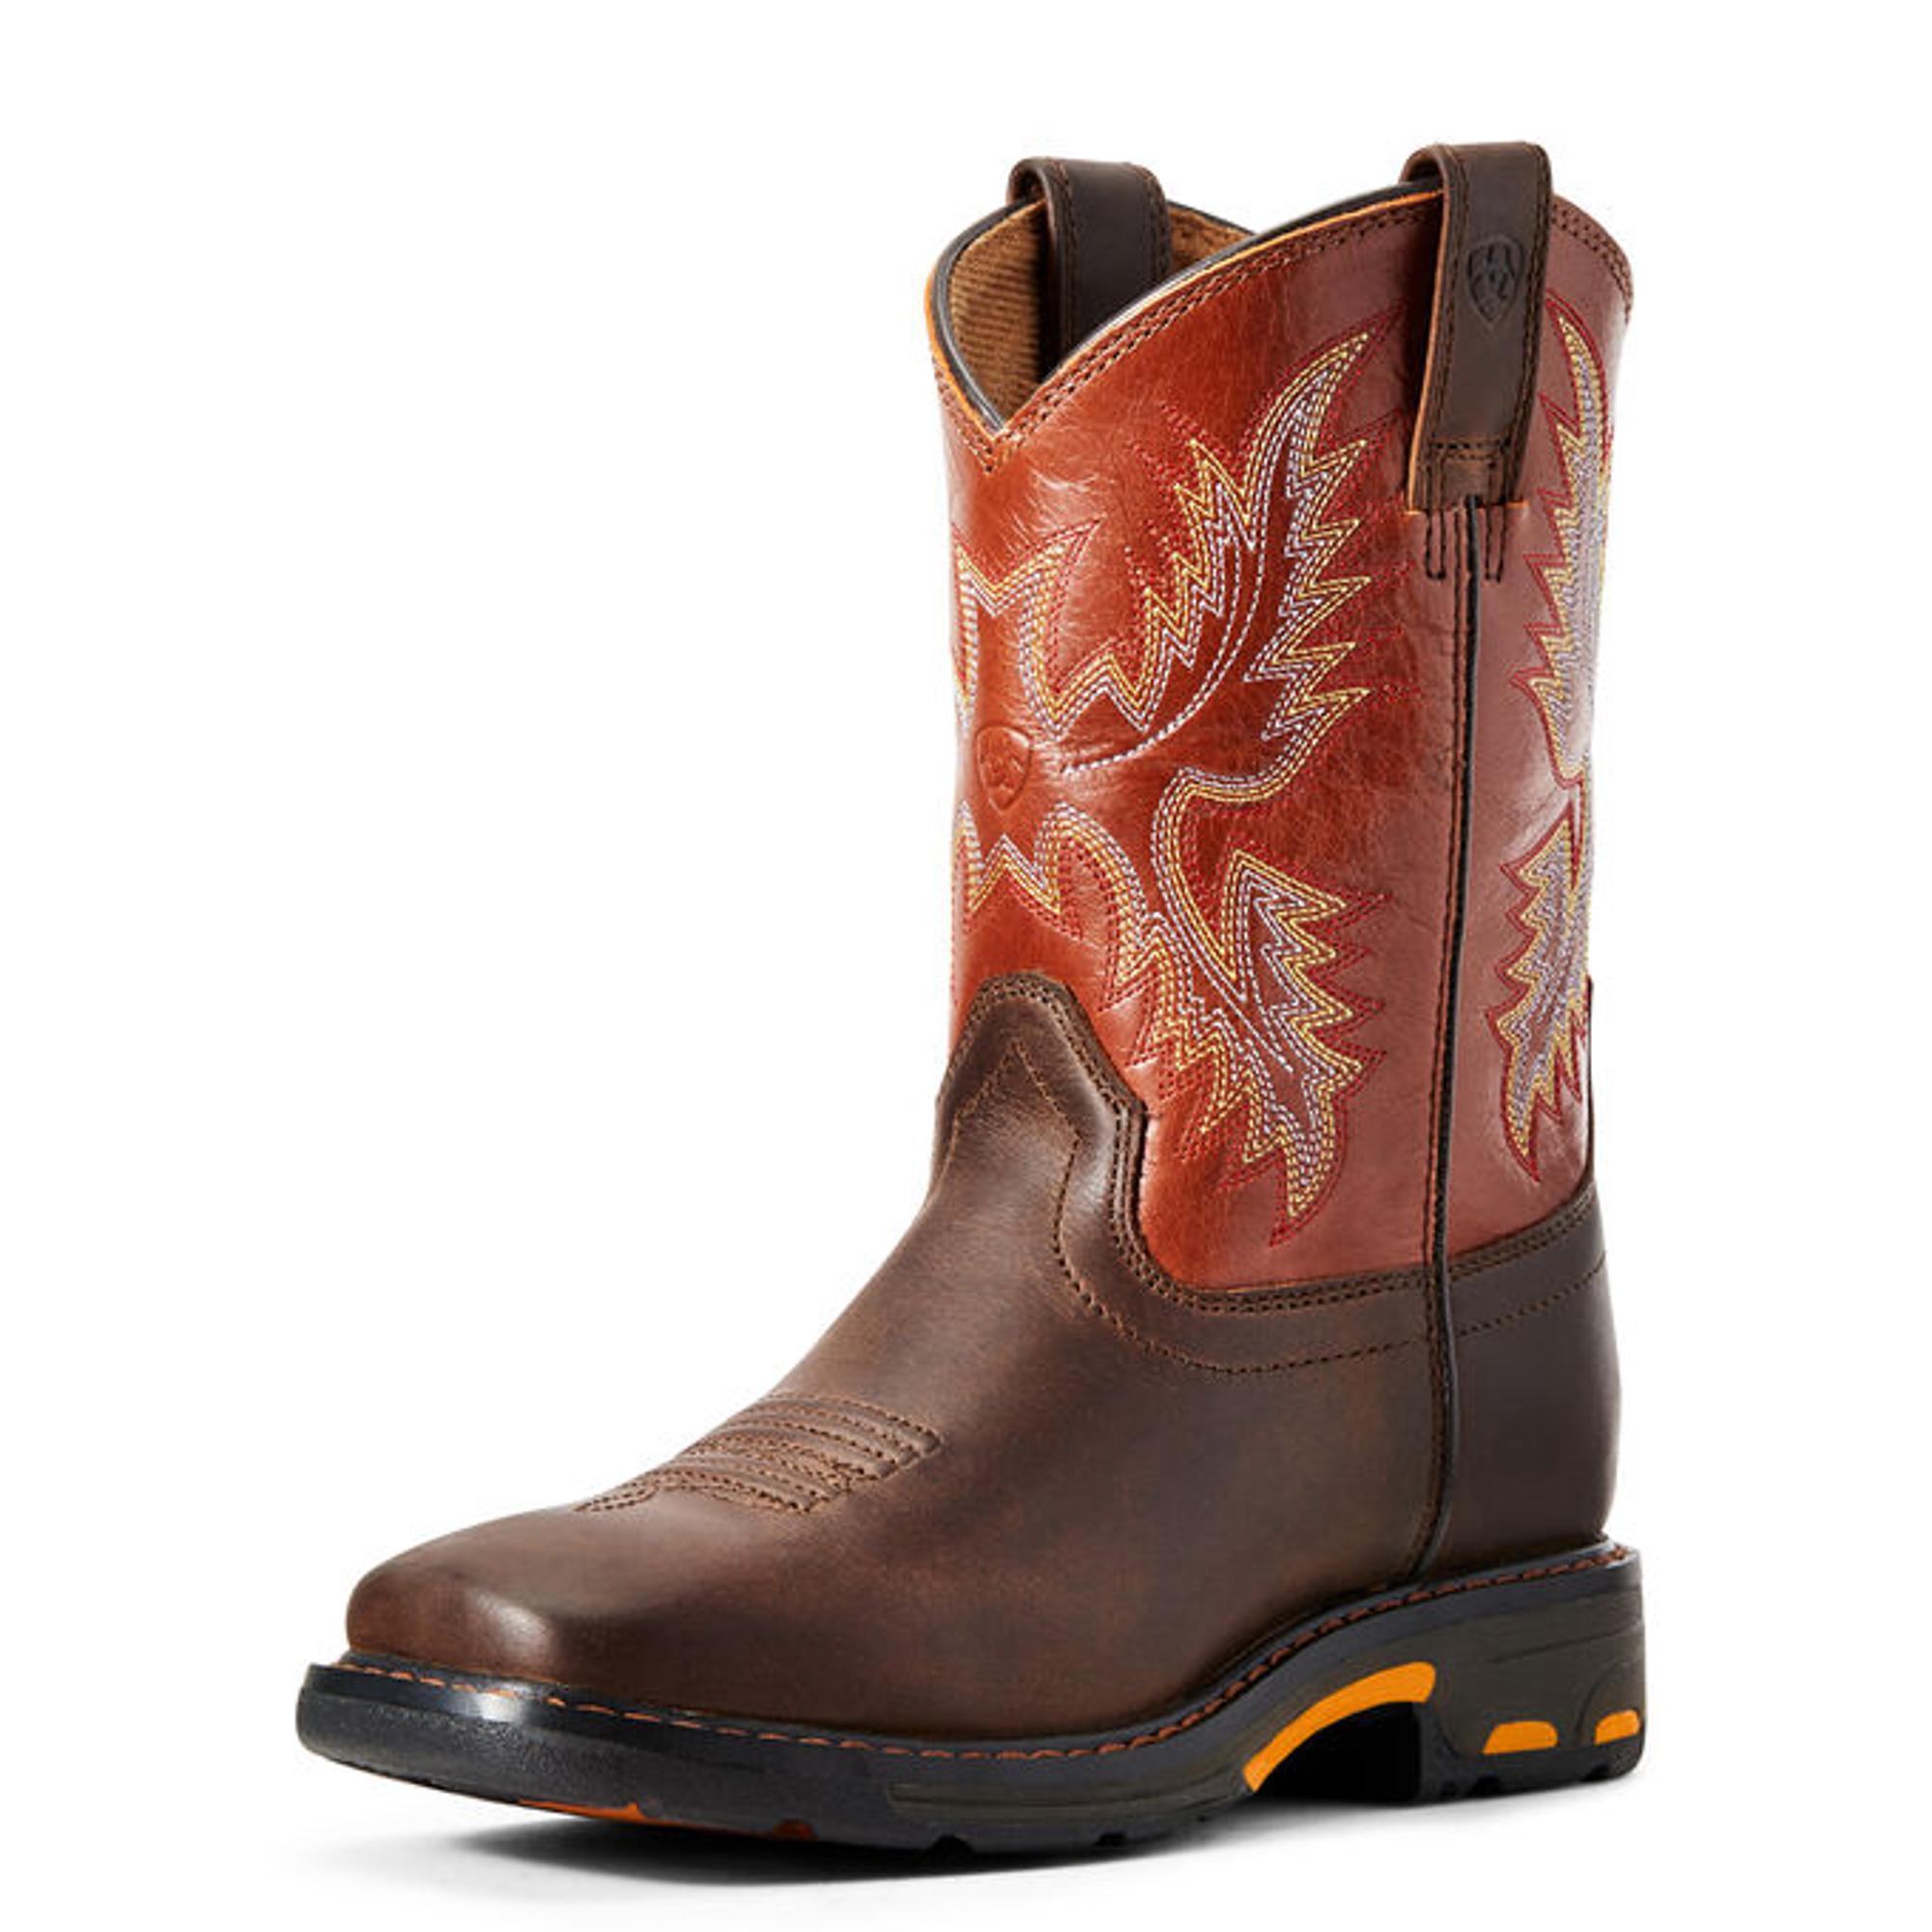 Ariat Boys Workhog Western and Work Boot